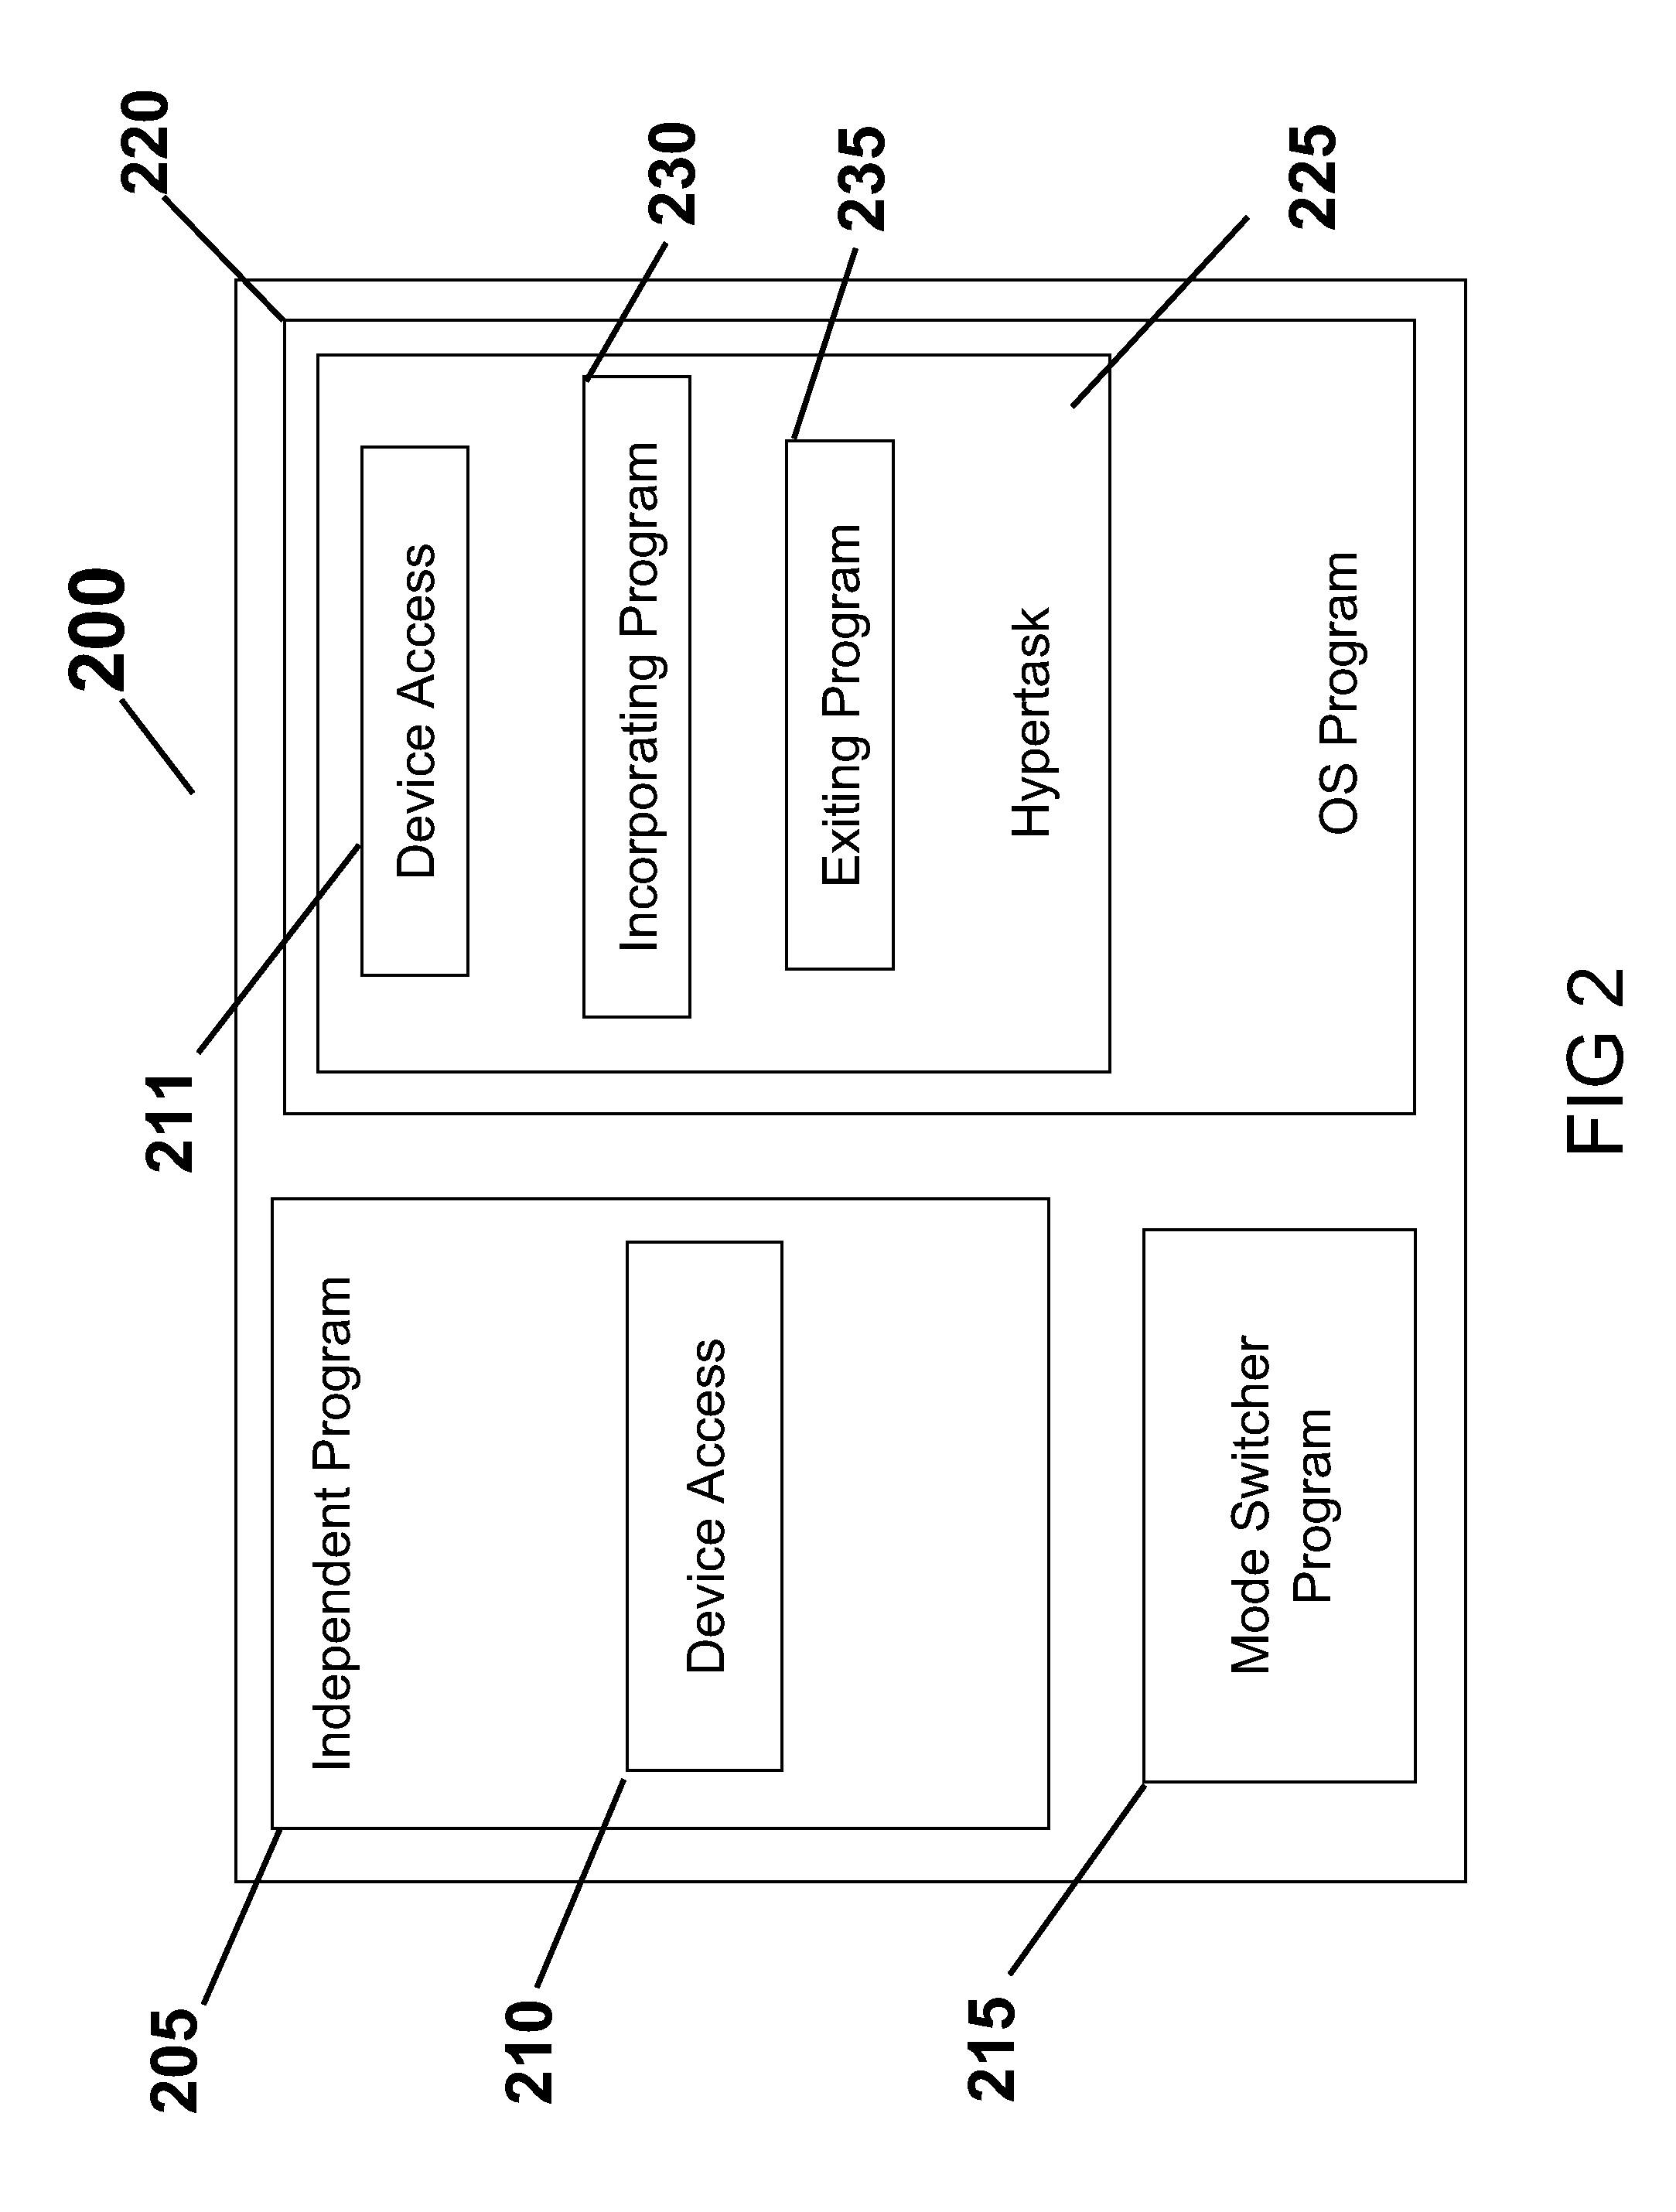 System and Methods for Migrating Independently Executing Program into and Out of an Operating System